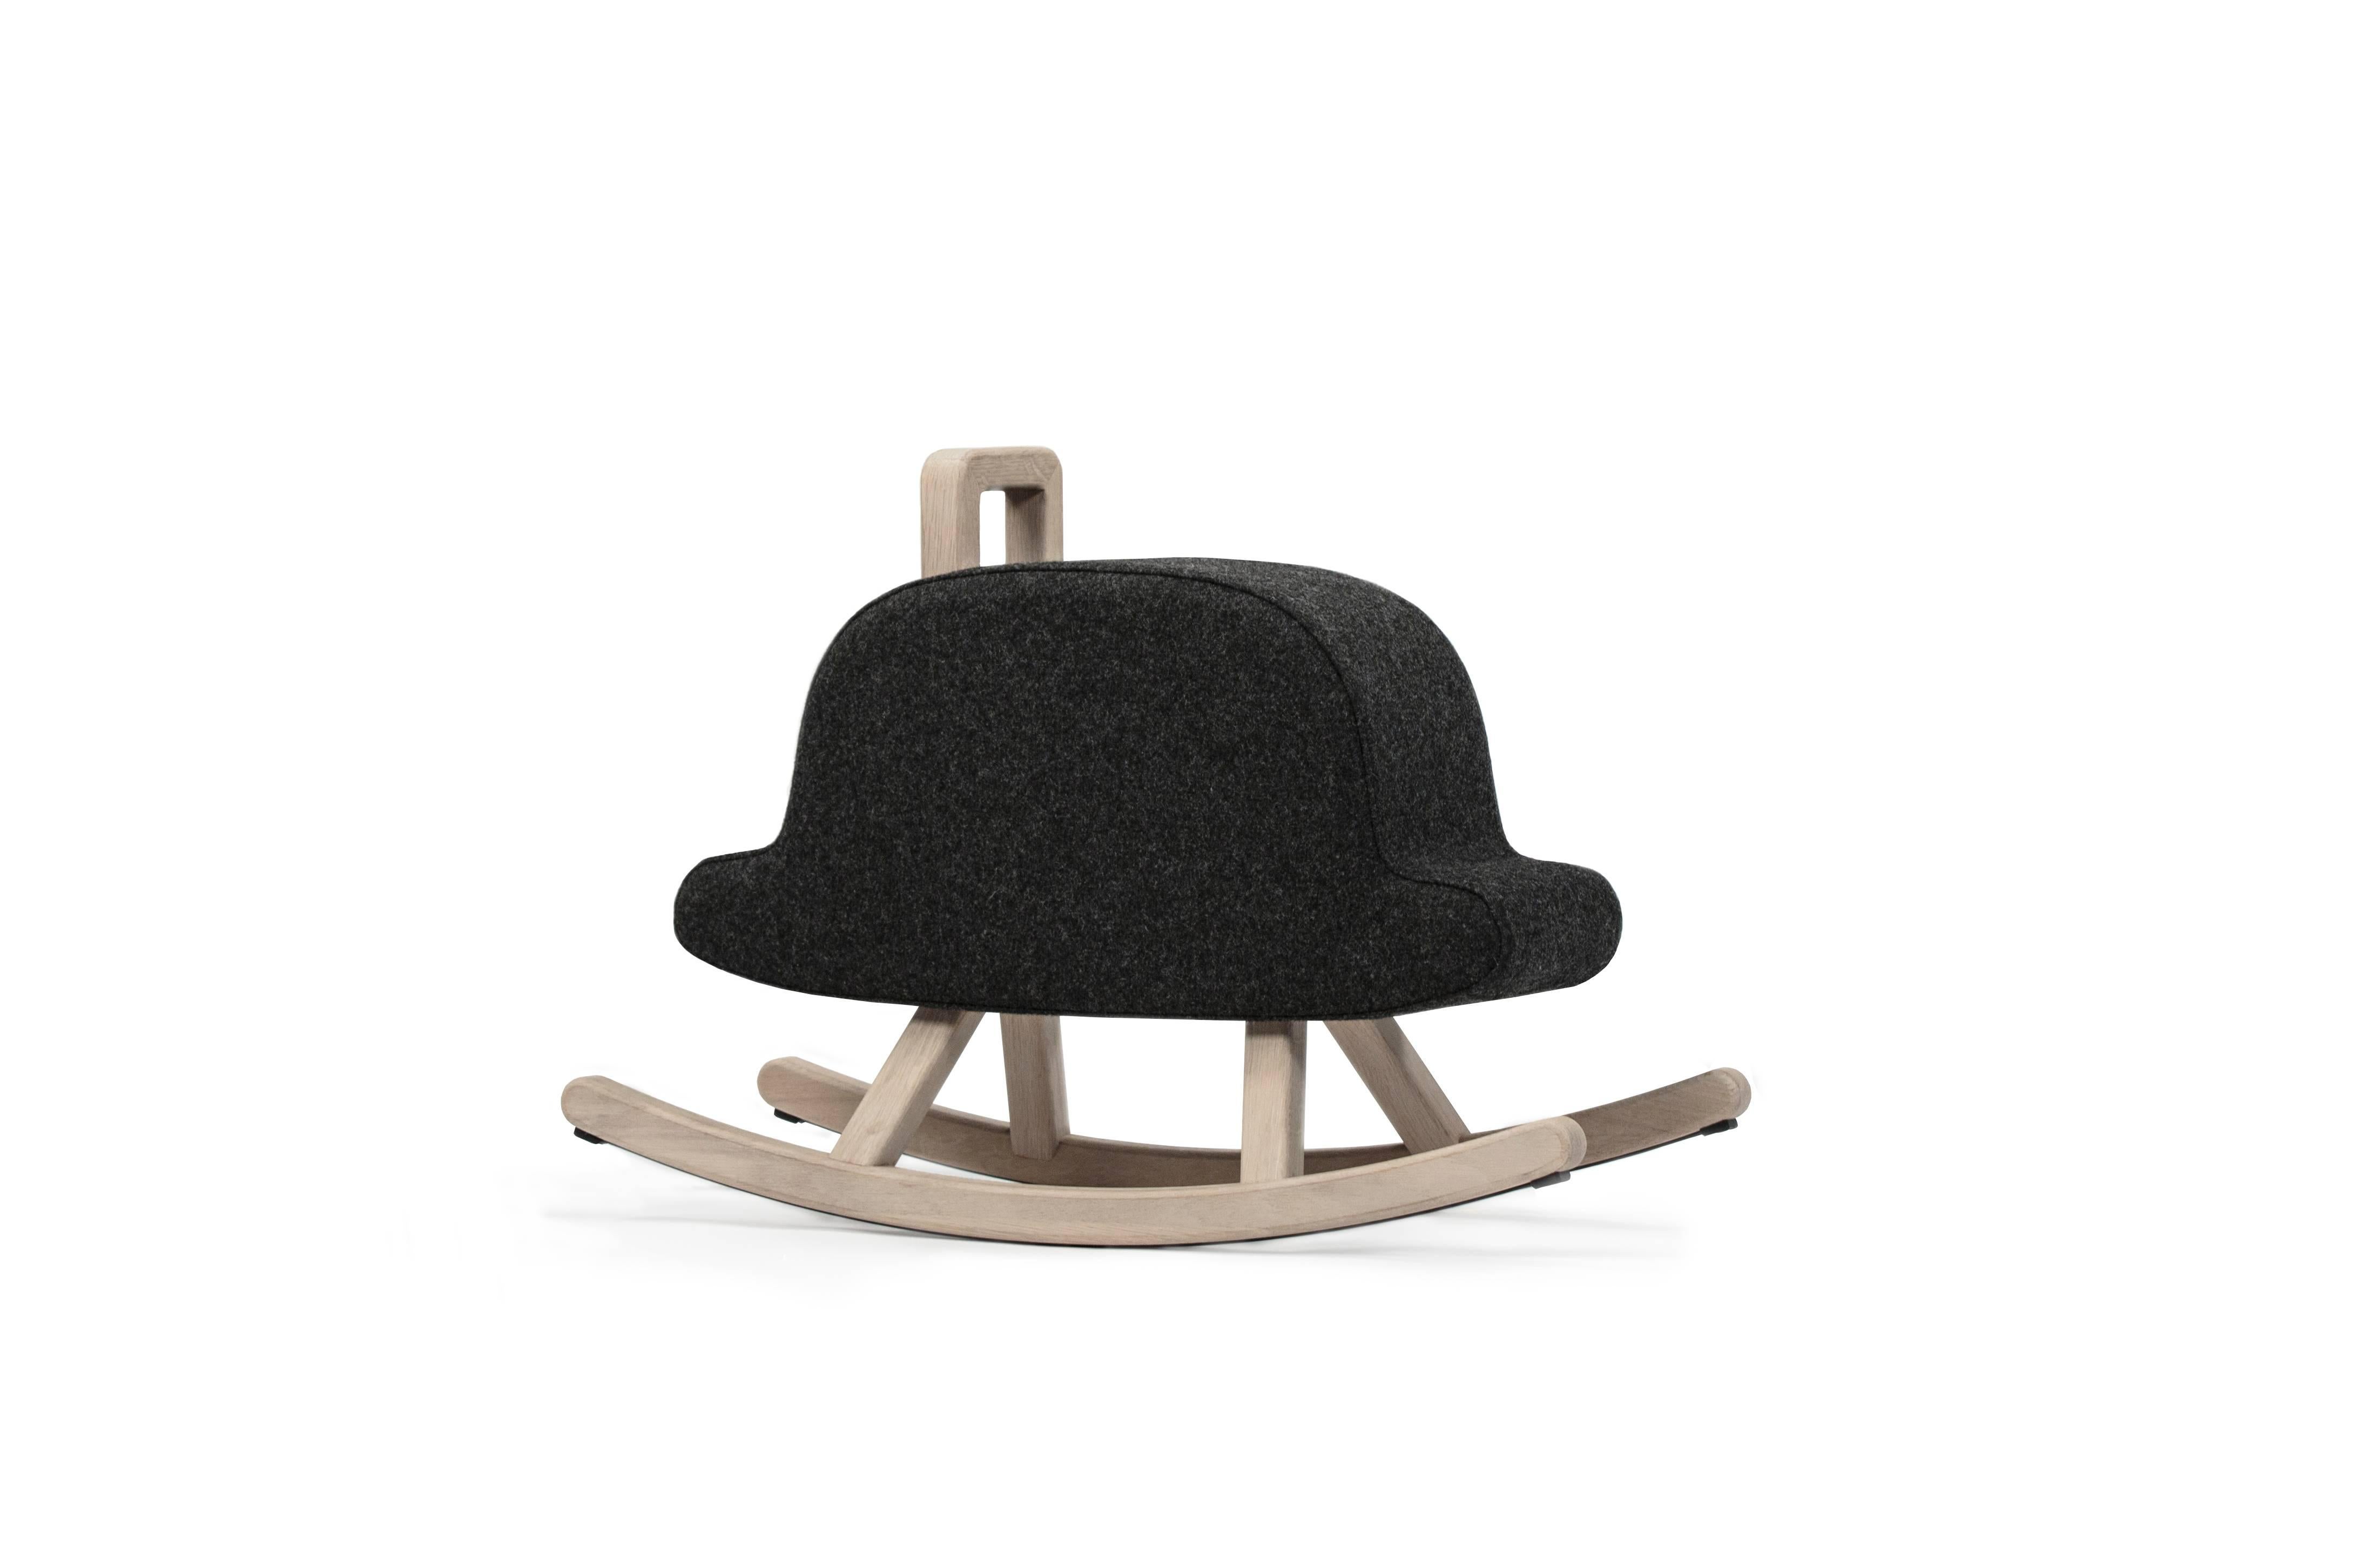 Iconic bowler hat child rocker by Maison Deux

Maison Deux
Contemporary, Netherlands, 2016
French oak, Kvadrat wool, rubber
Measures: L 27 in, seat H 15.75 in, D 10.5 in

Lead time 2-4 weeks if not in stock.